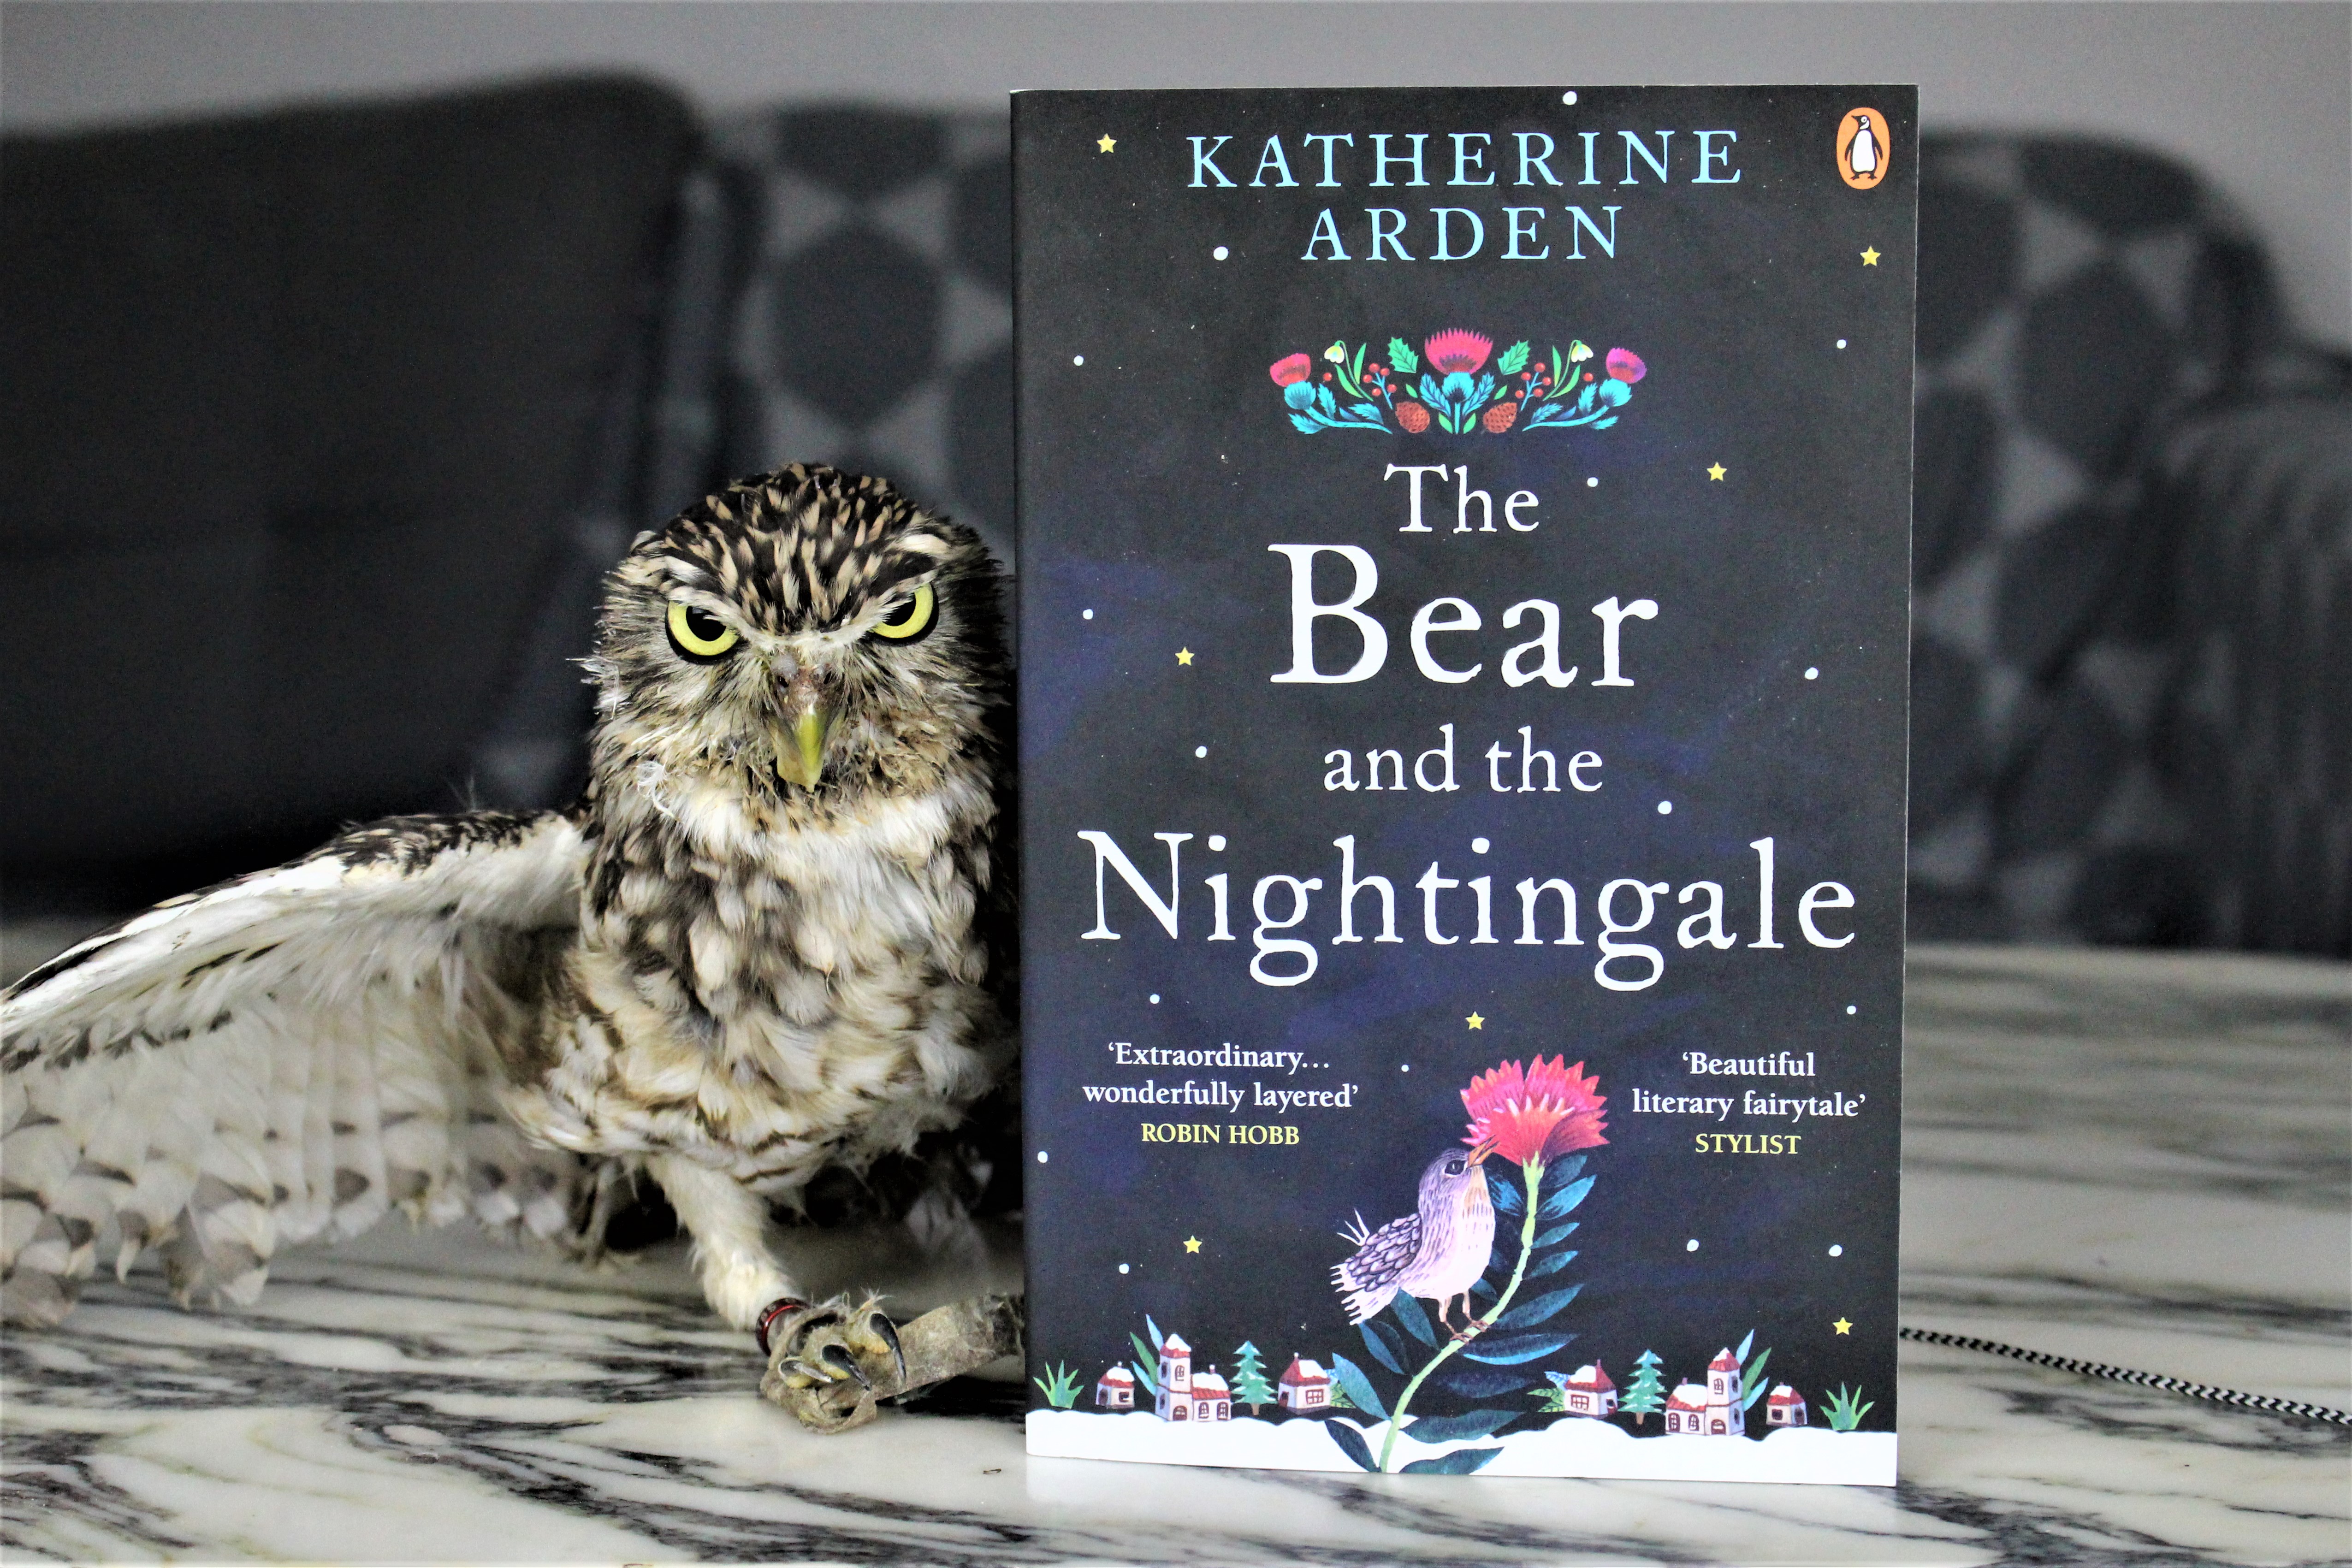 The Bear and the Nightingale by Katherine Arden